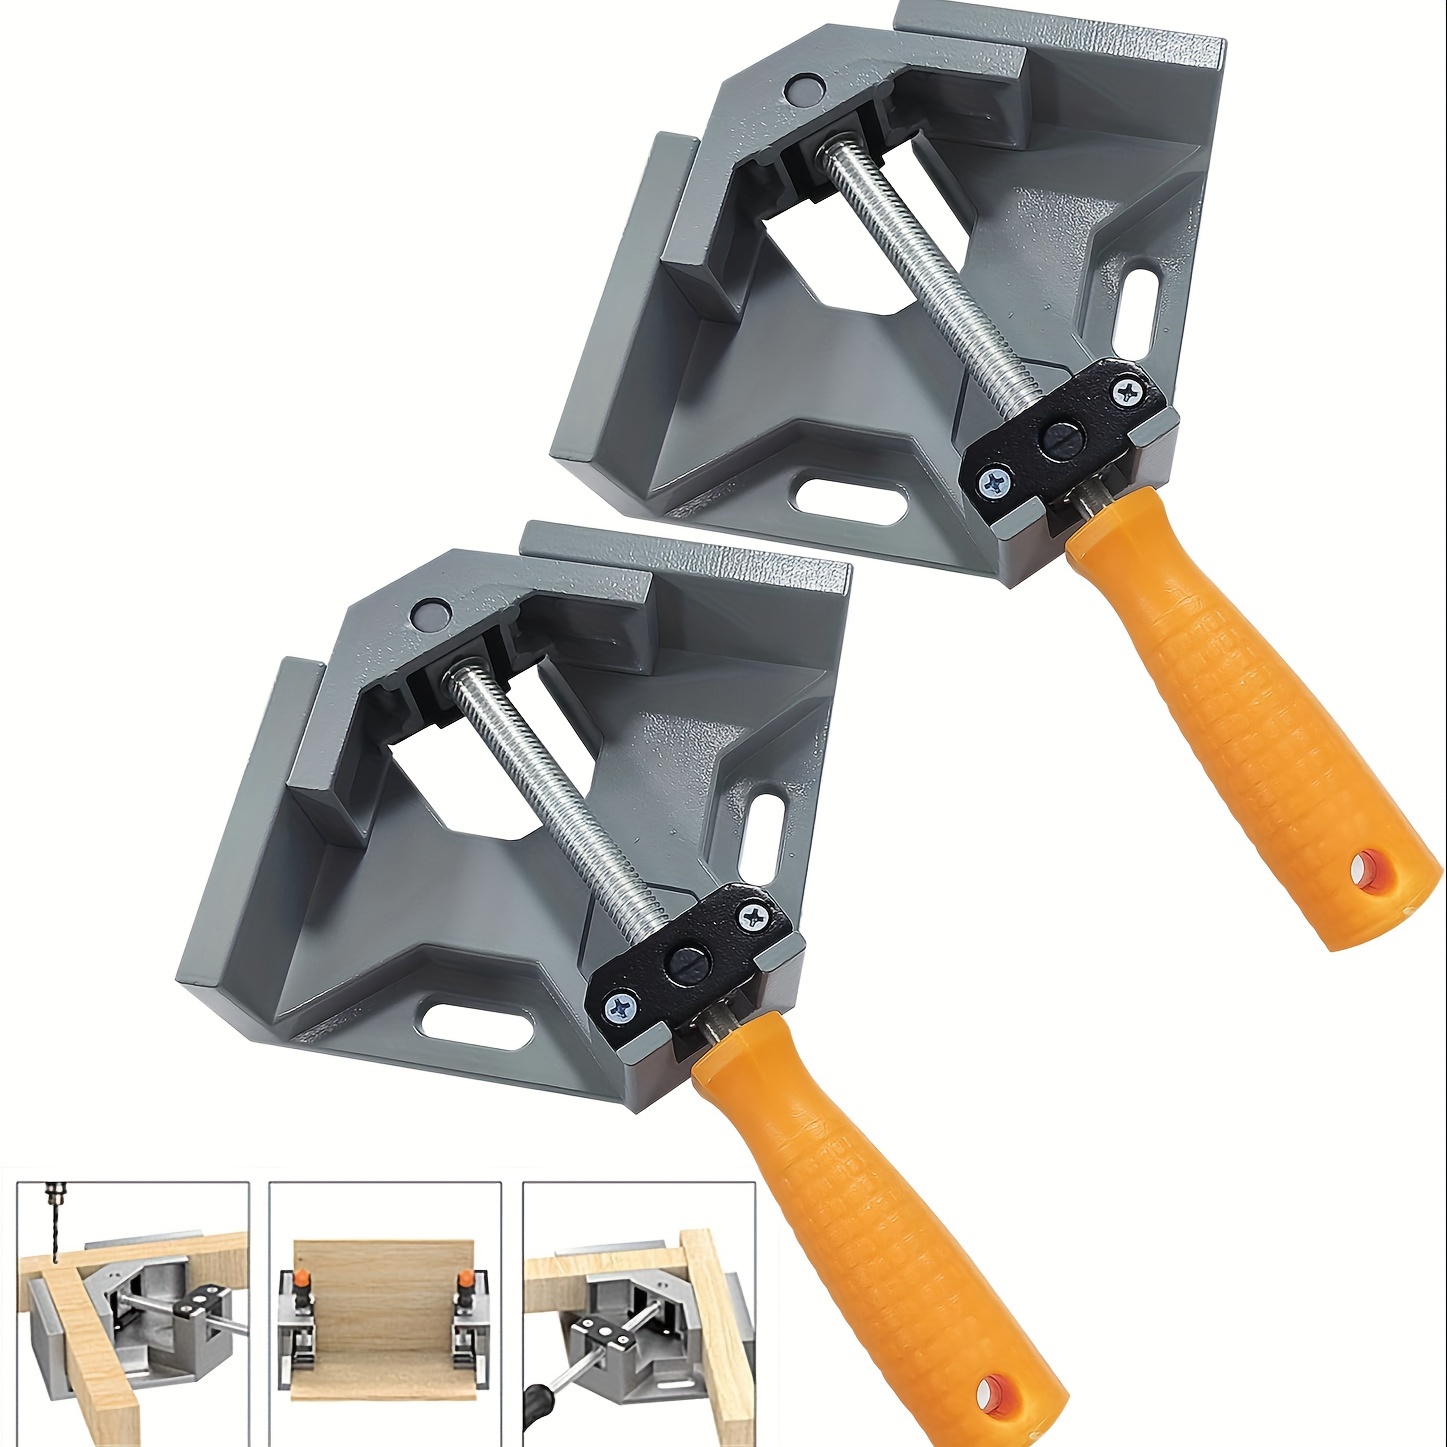 

2pcs Right Angle Clamp, Aluminium Alloy Adjustable 90 Degree Corner Clamp High Precision Woodworking Clamp Picture Frame Cabinet Clamp For Welding Framing Drilling Doweling